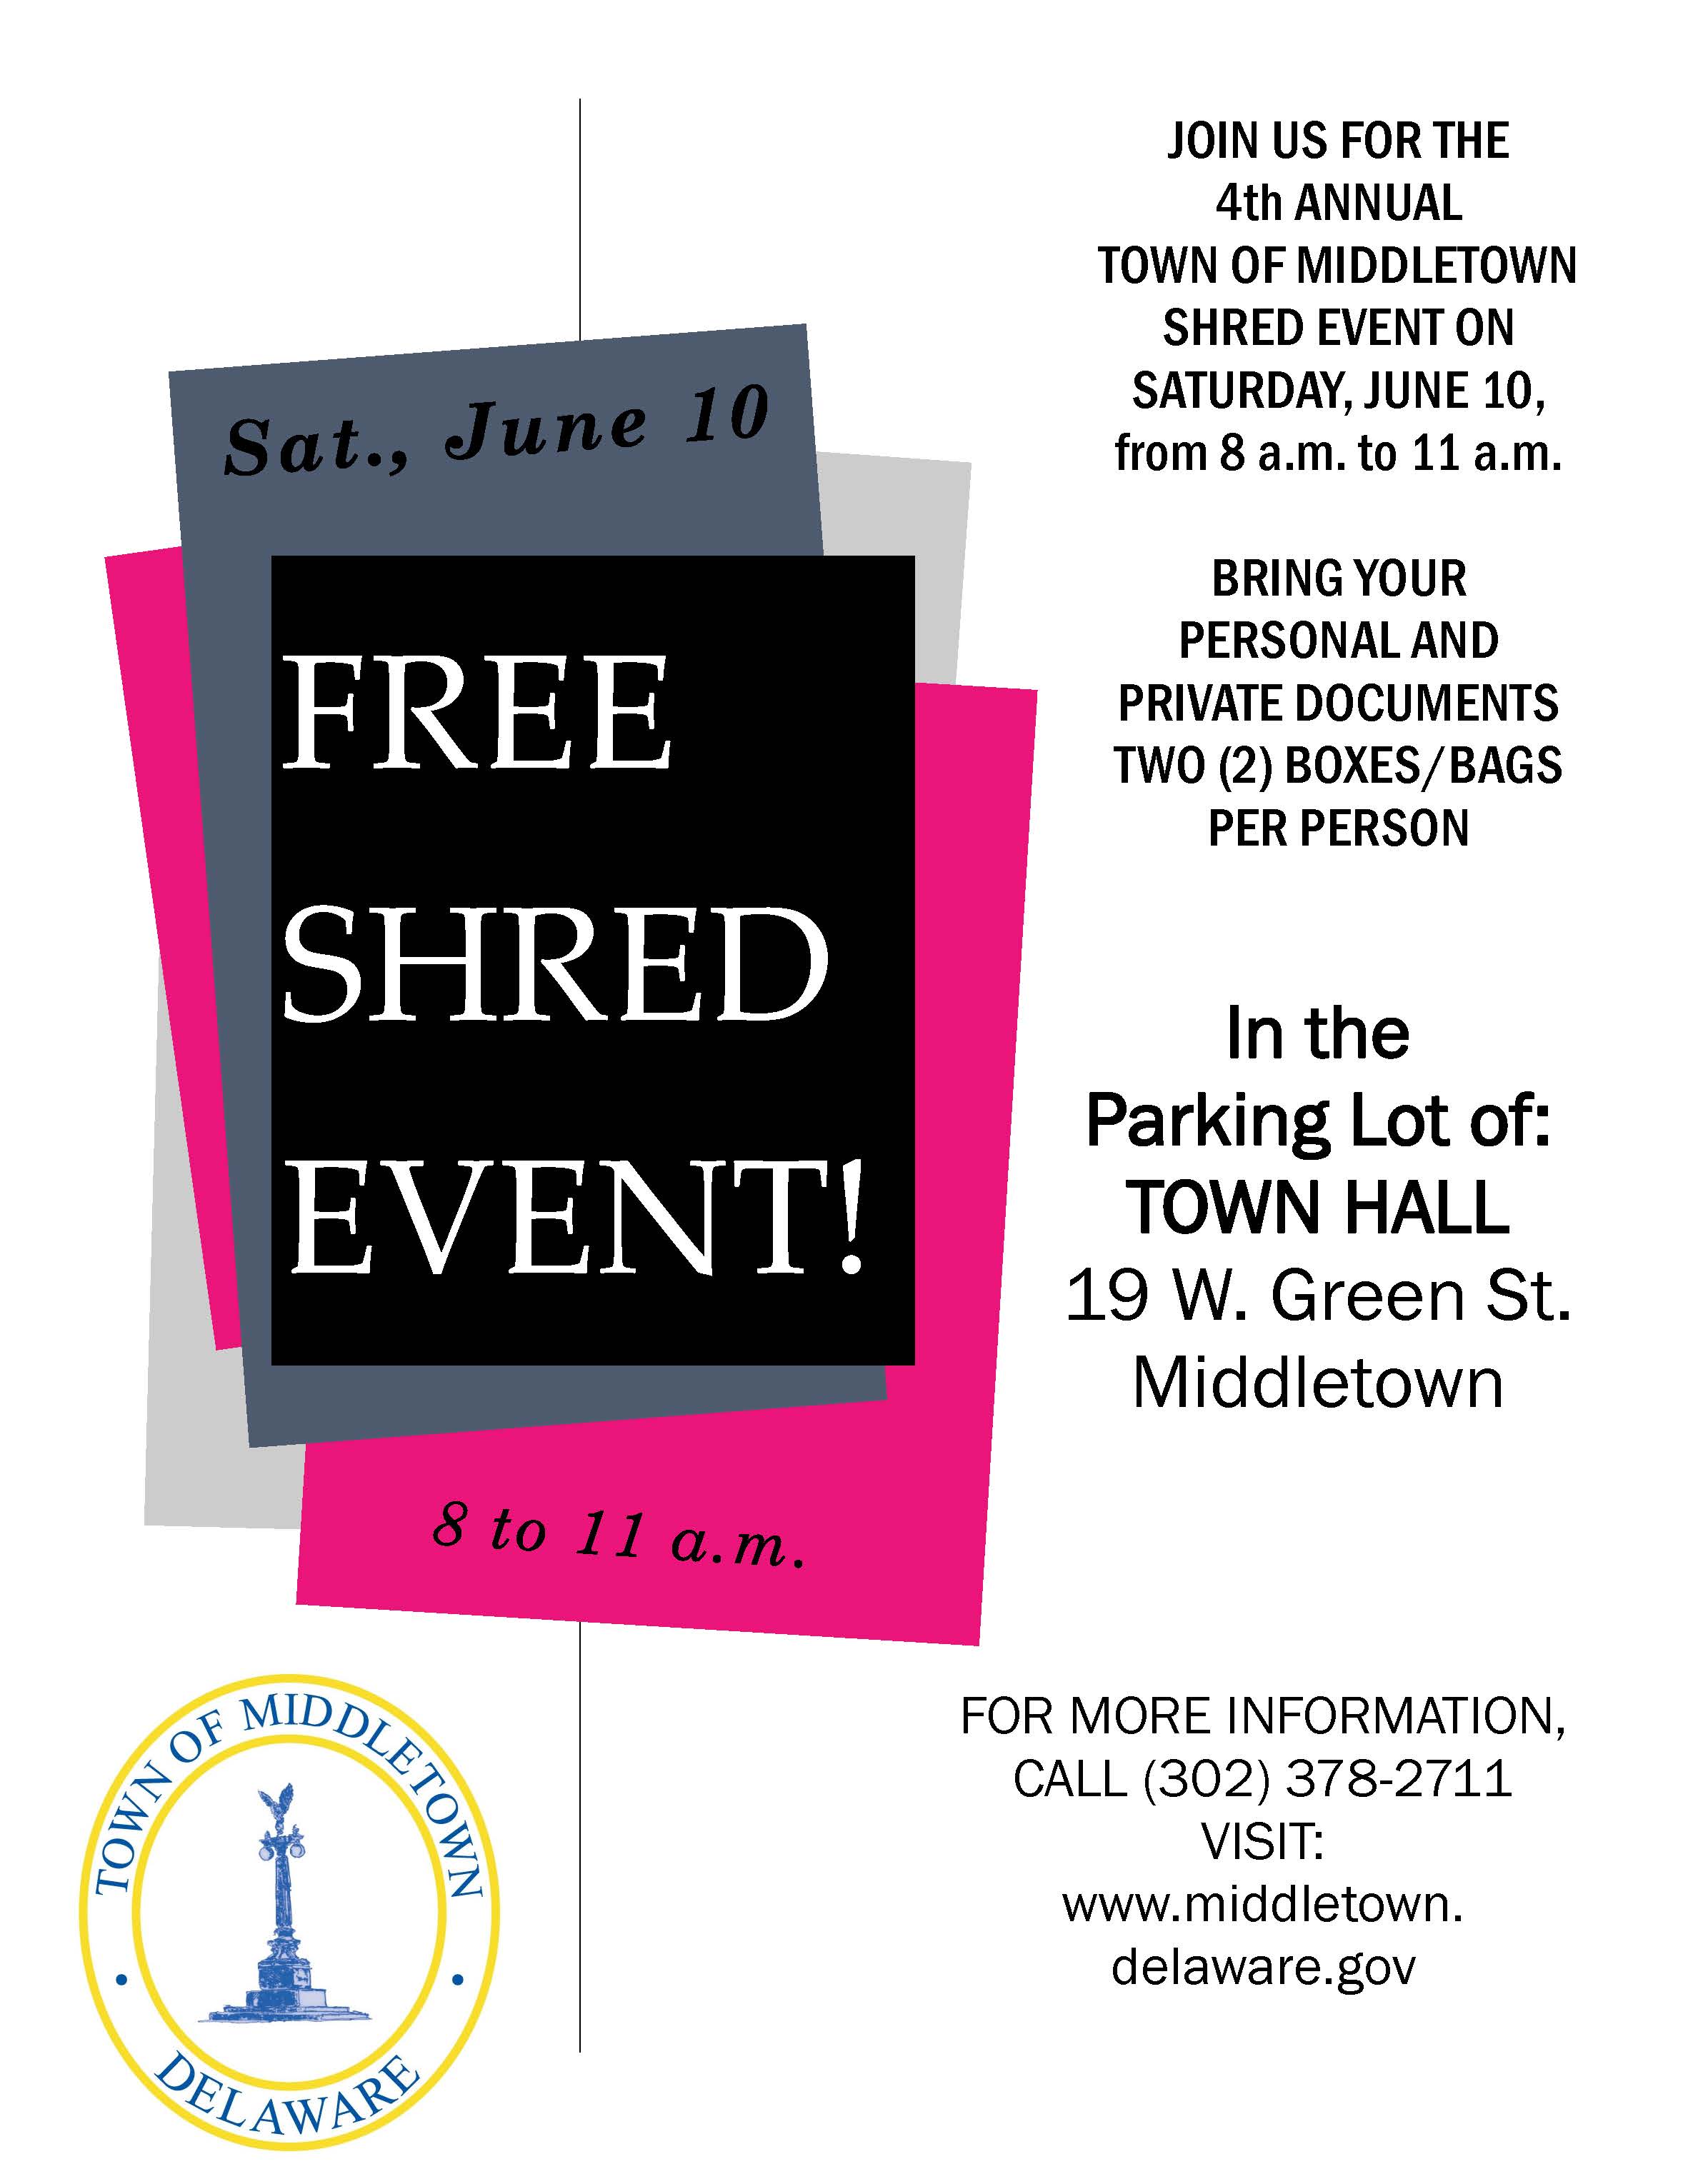 Free Shred Event!